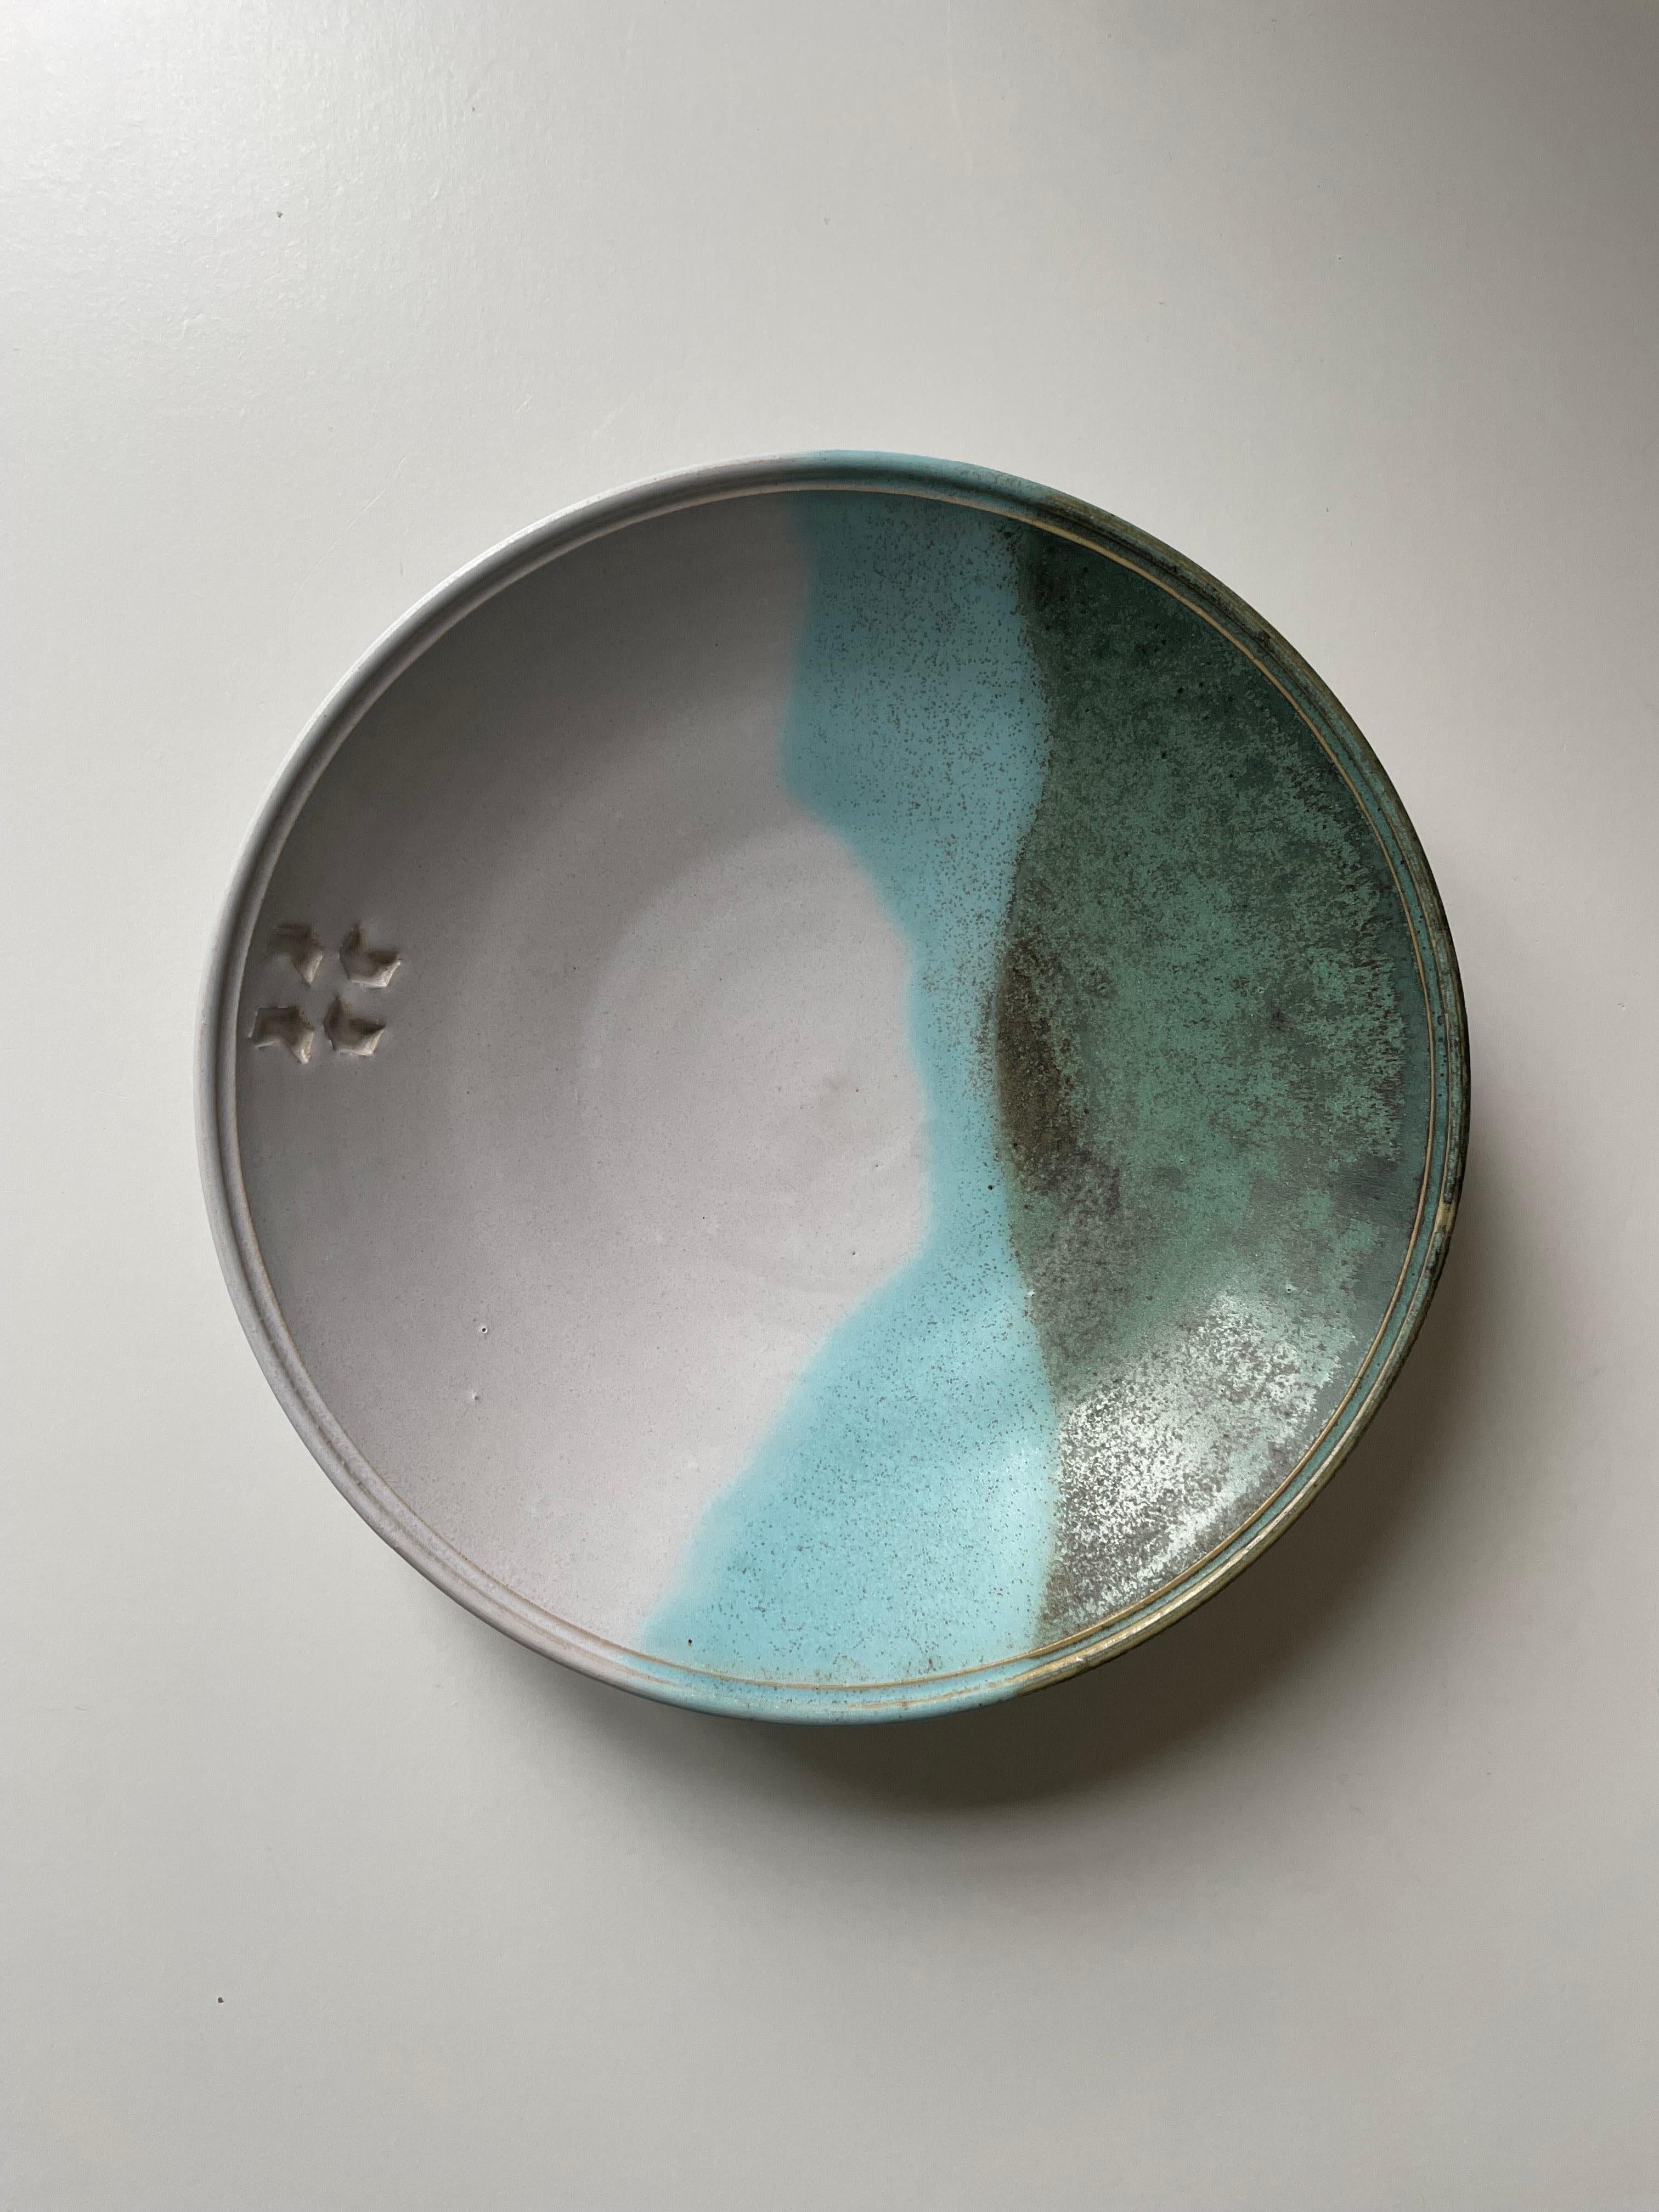 Ceramic decorative dish / bowl / wall plaque / centerpiece in white, blue and green glazed colors. Organic wavy lines and small relief mark on one side. Beautiful vintage condition. 
Denmark, 1980s.